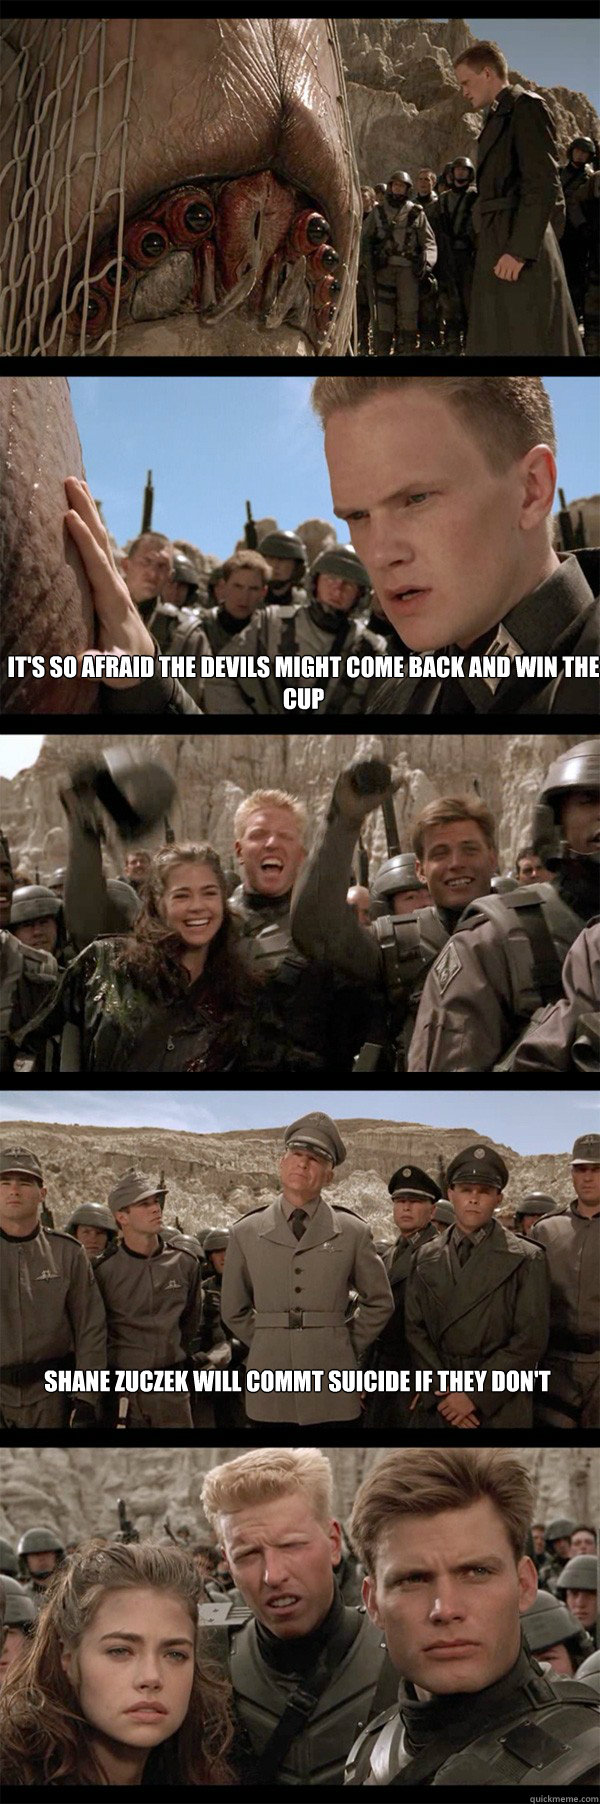 It's so afraid the Devils might come back and win the cup Shane Zuczek will commt suicide if they don't  Starship Troopers